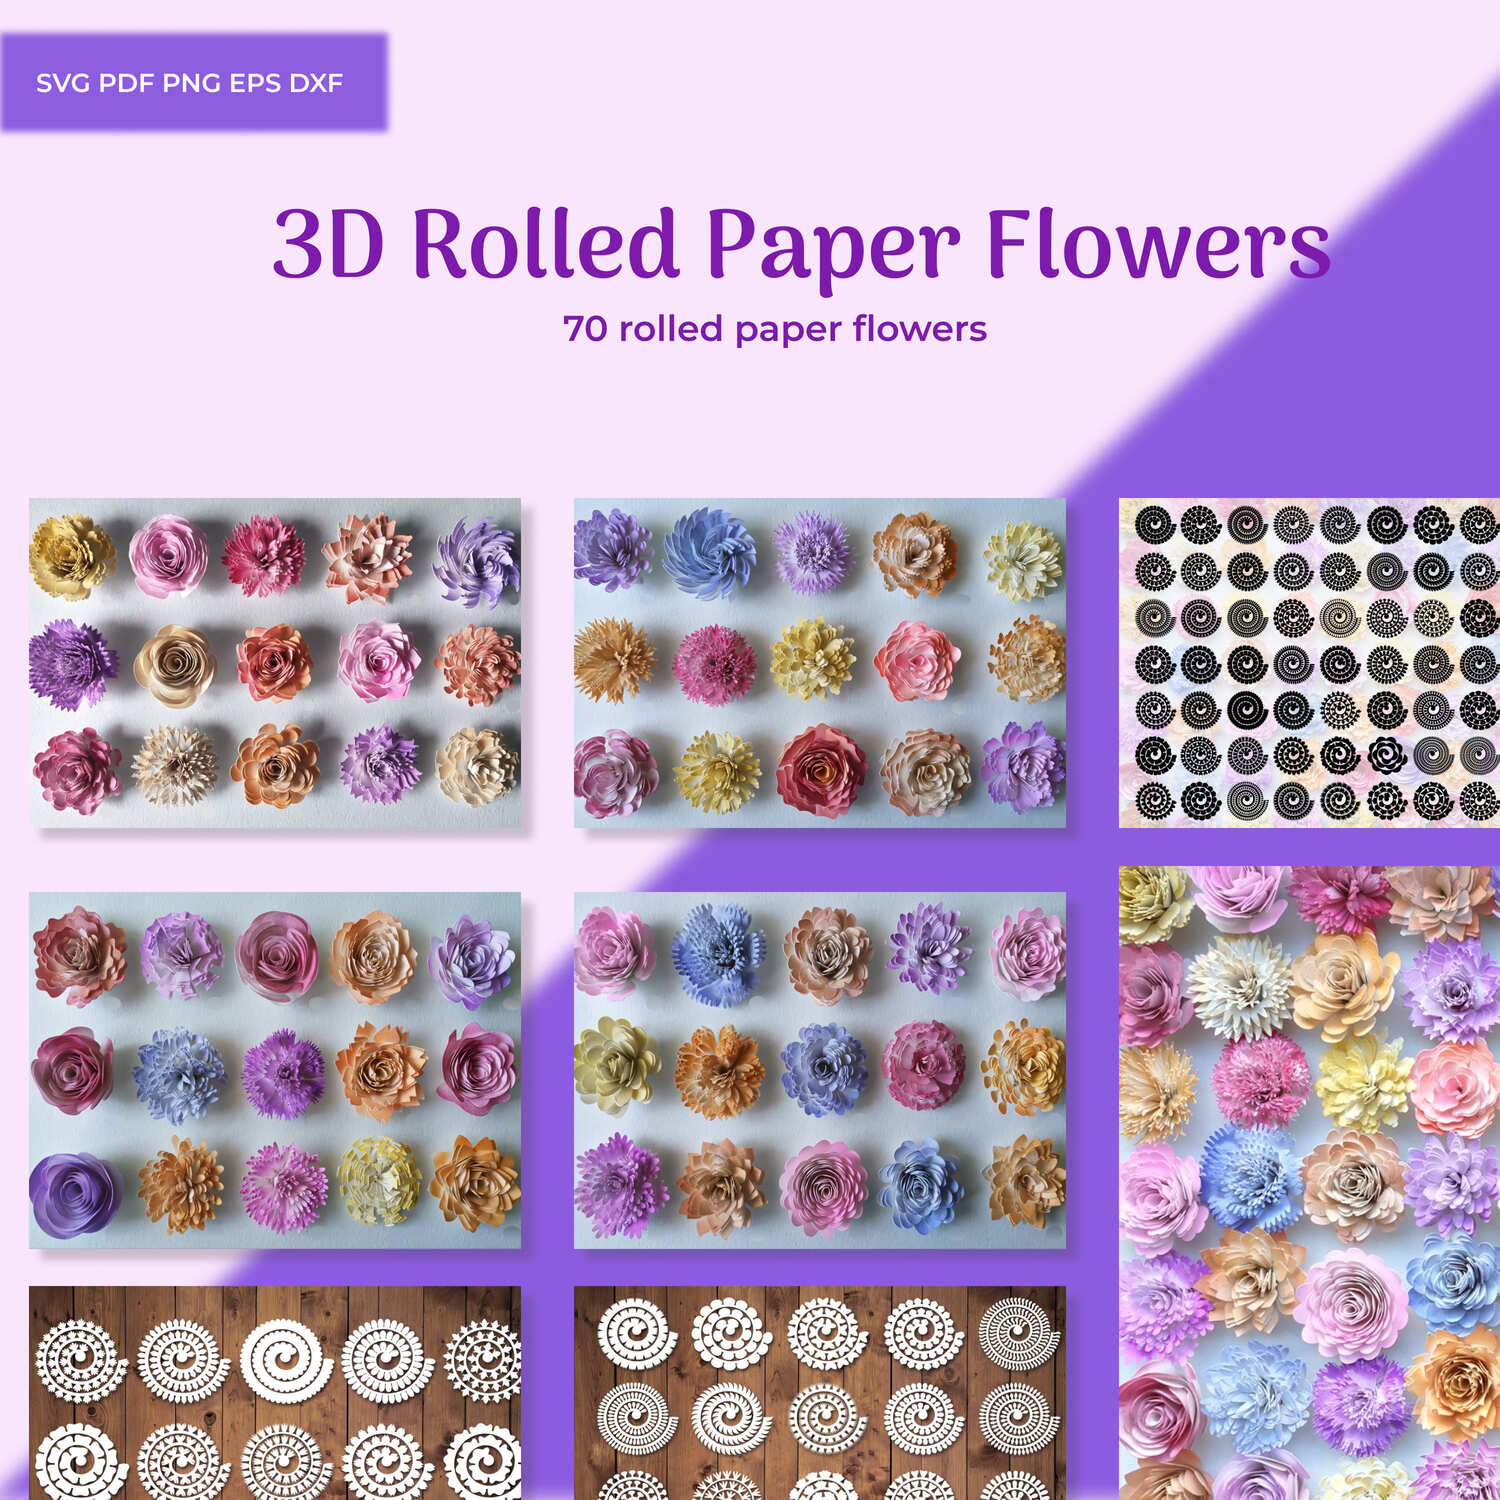 3D Rolled Paper Flowers SVG main cover.